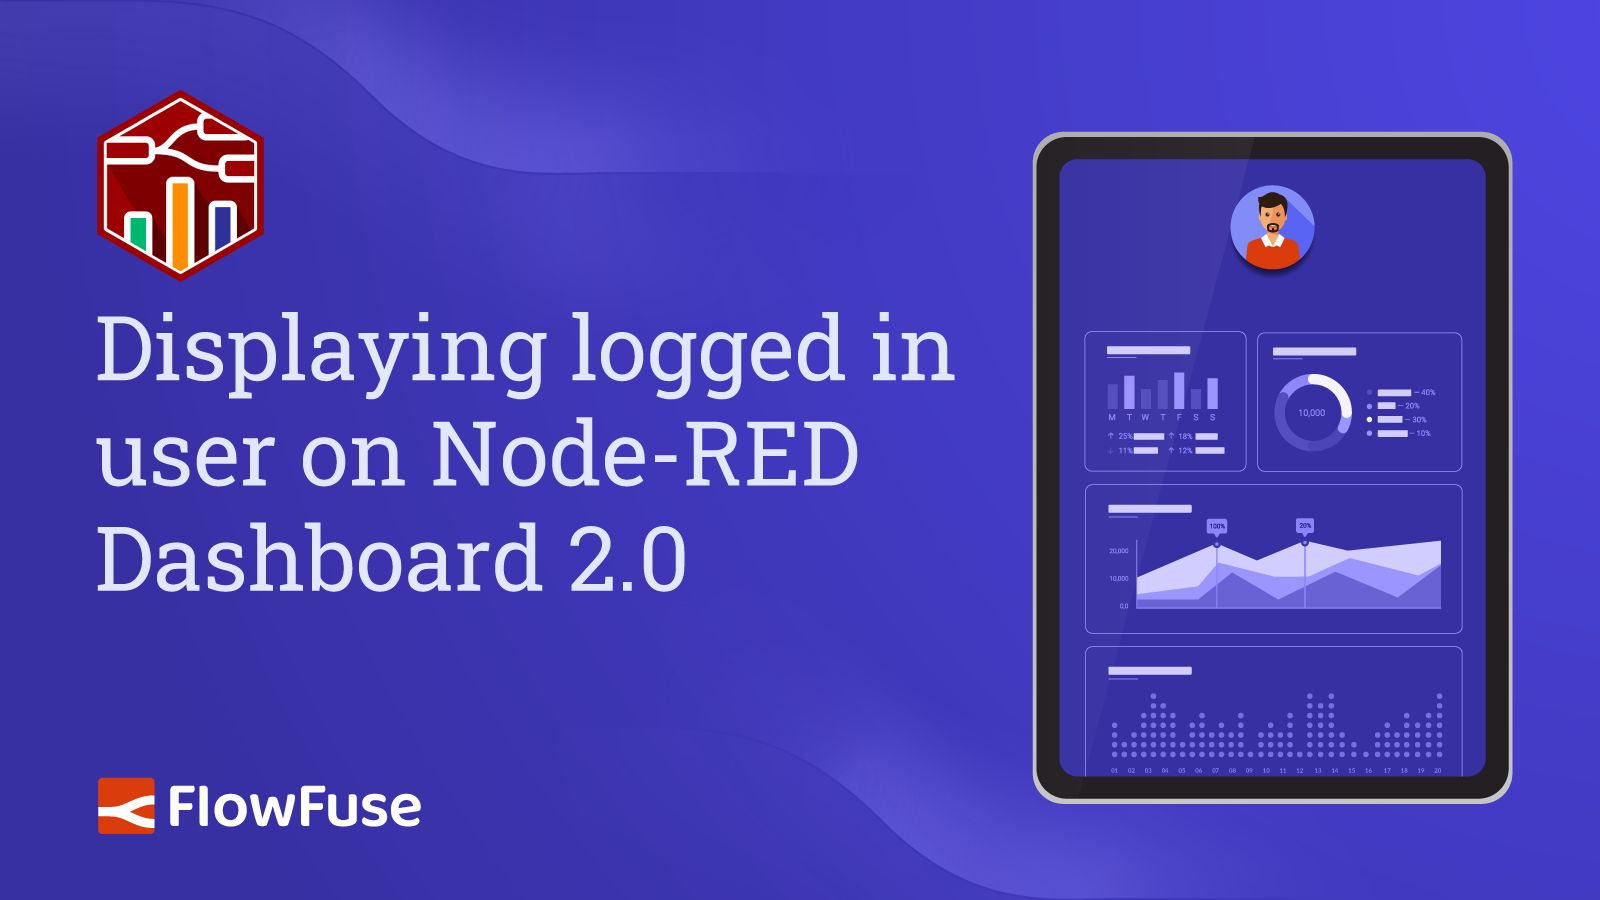 Image representing Displaying logged in user on Node-RED Dashboard 2.0